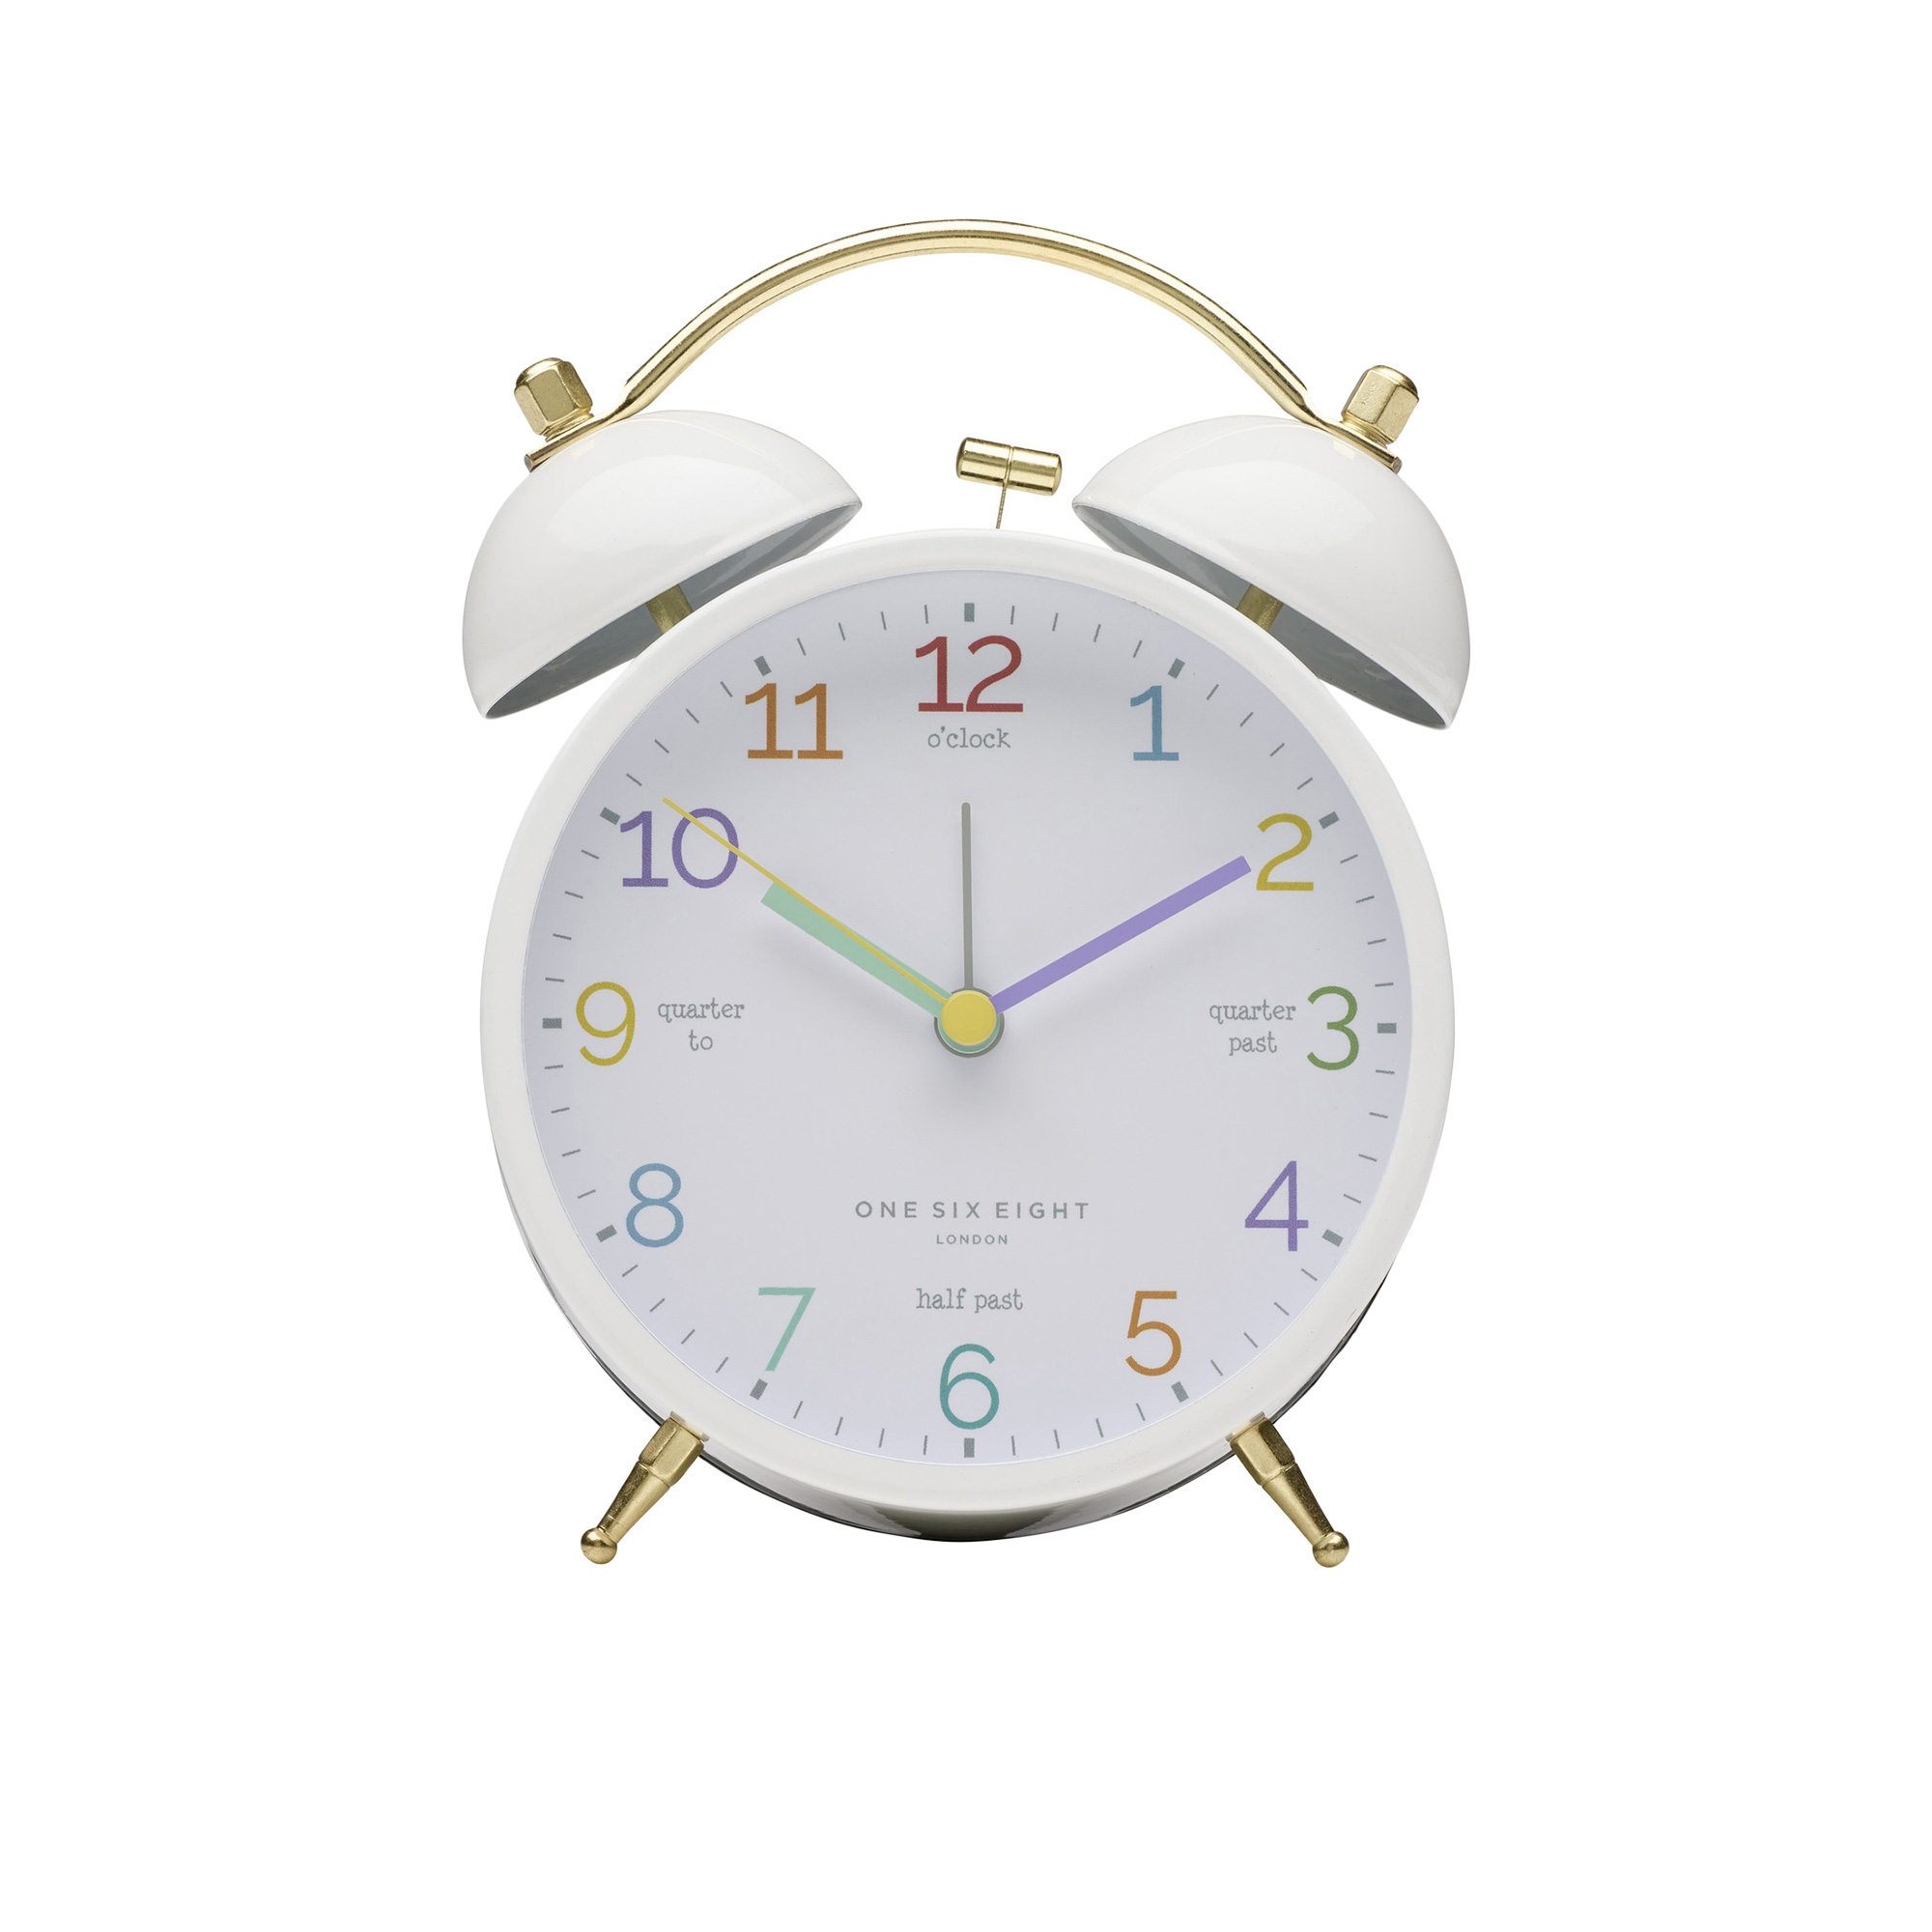 One Six Eight London Learn The Time Alarm Clock White Image 1